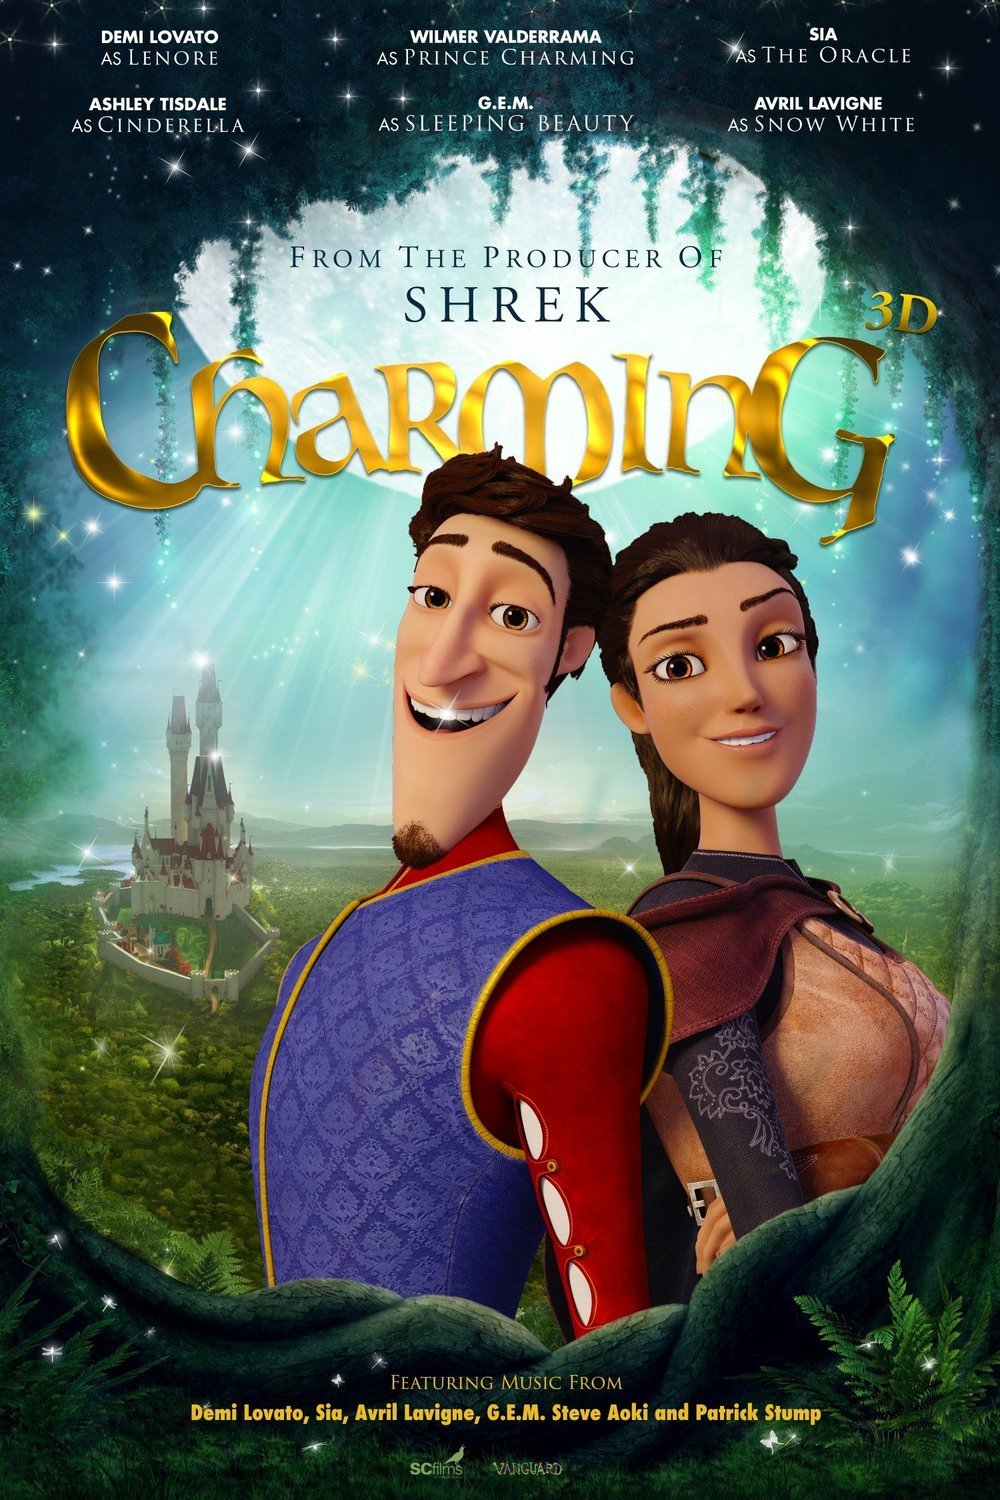 Poster of the movie Charming